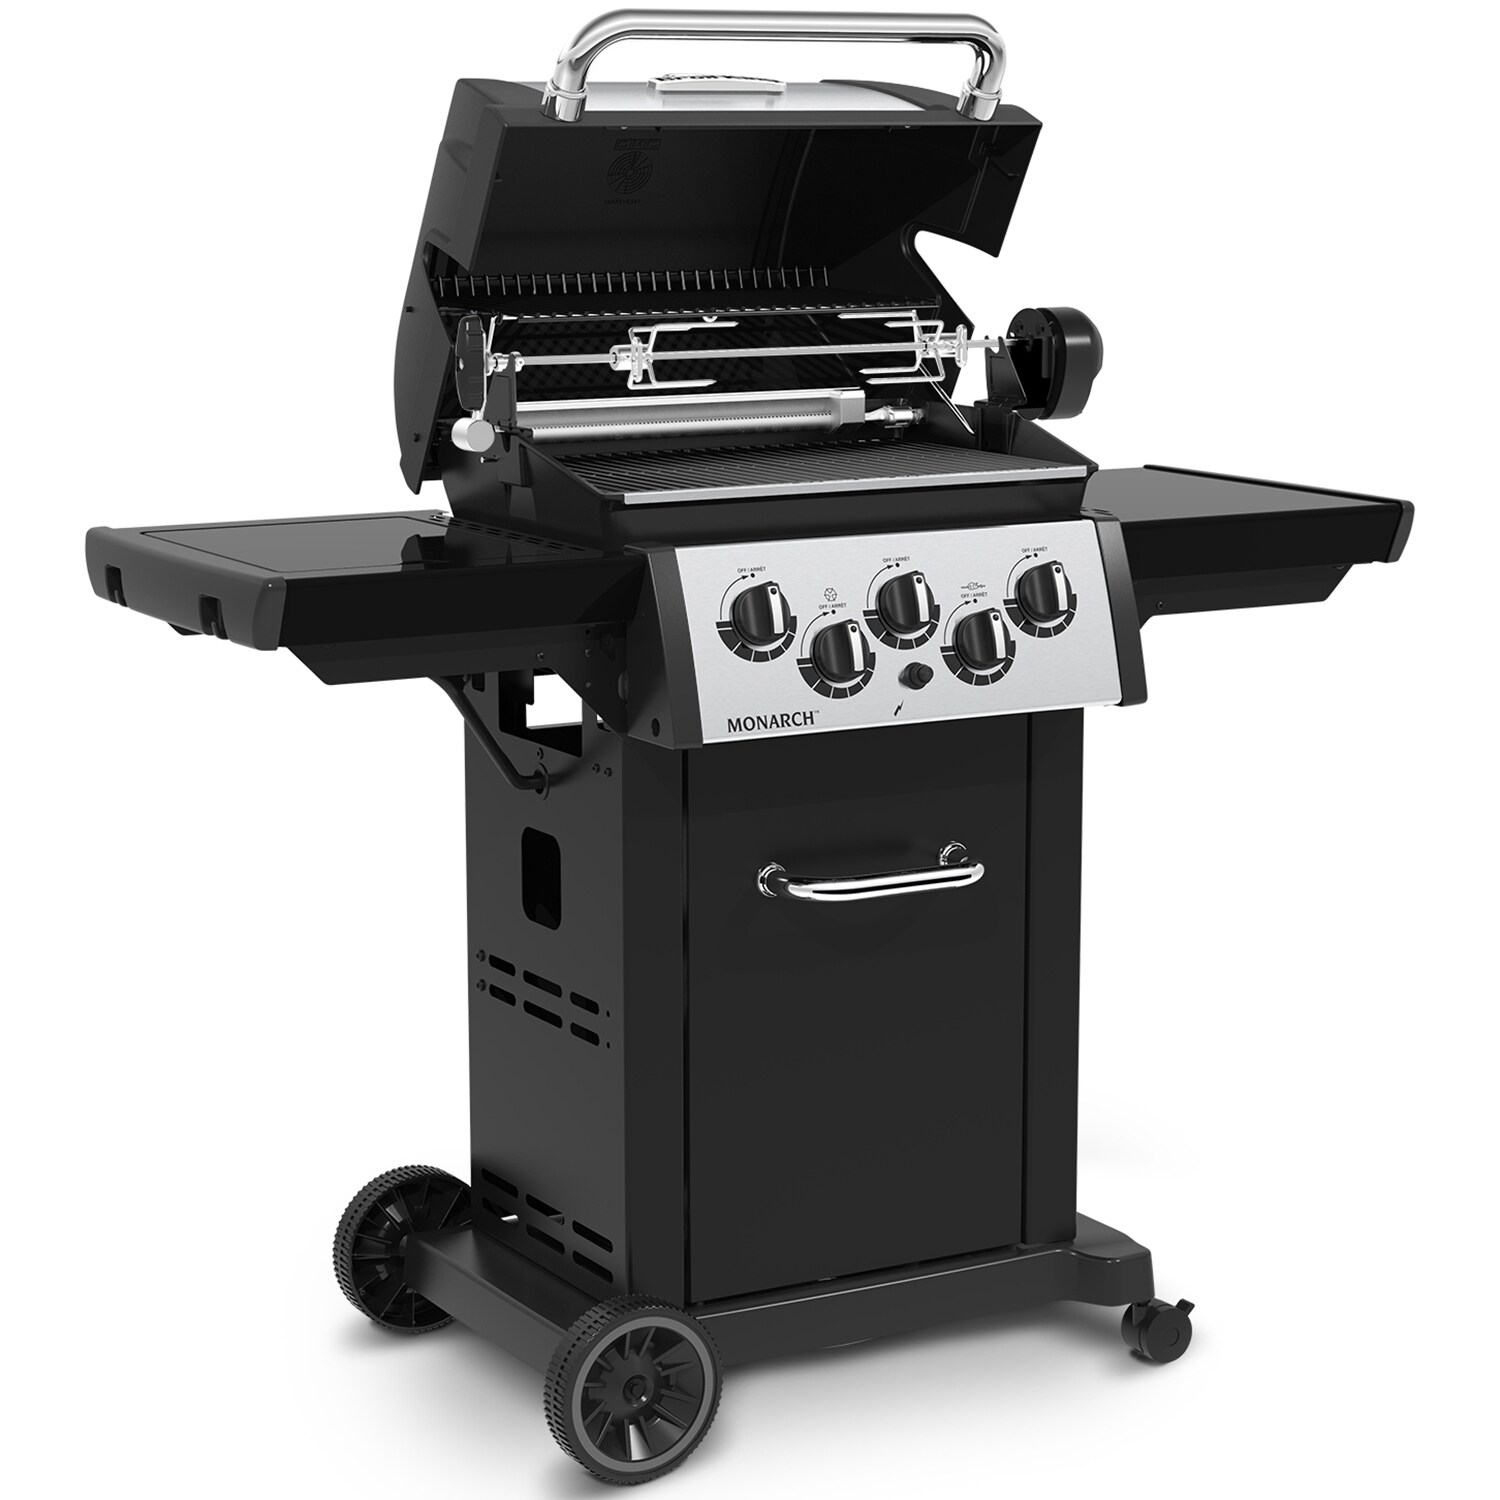 Broil King Monarch 390 Stainless Steel/Black 3-Burner Liquid Propane Gas Grill with 1 Side Burner in the Gas department at Lowes.com